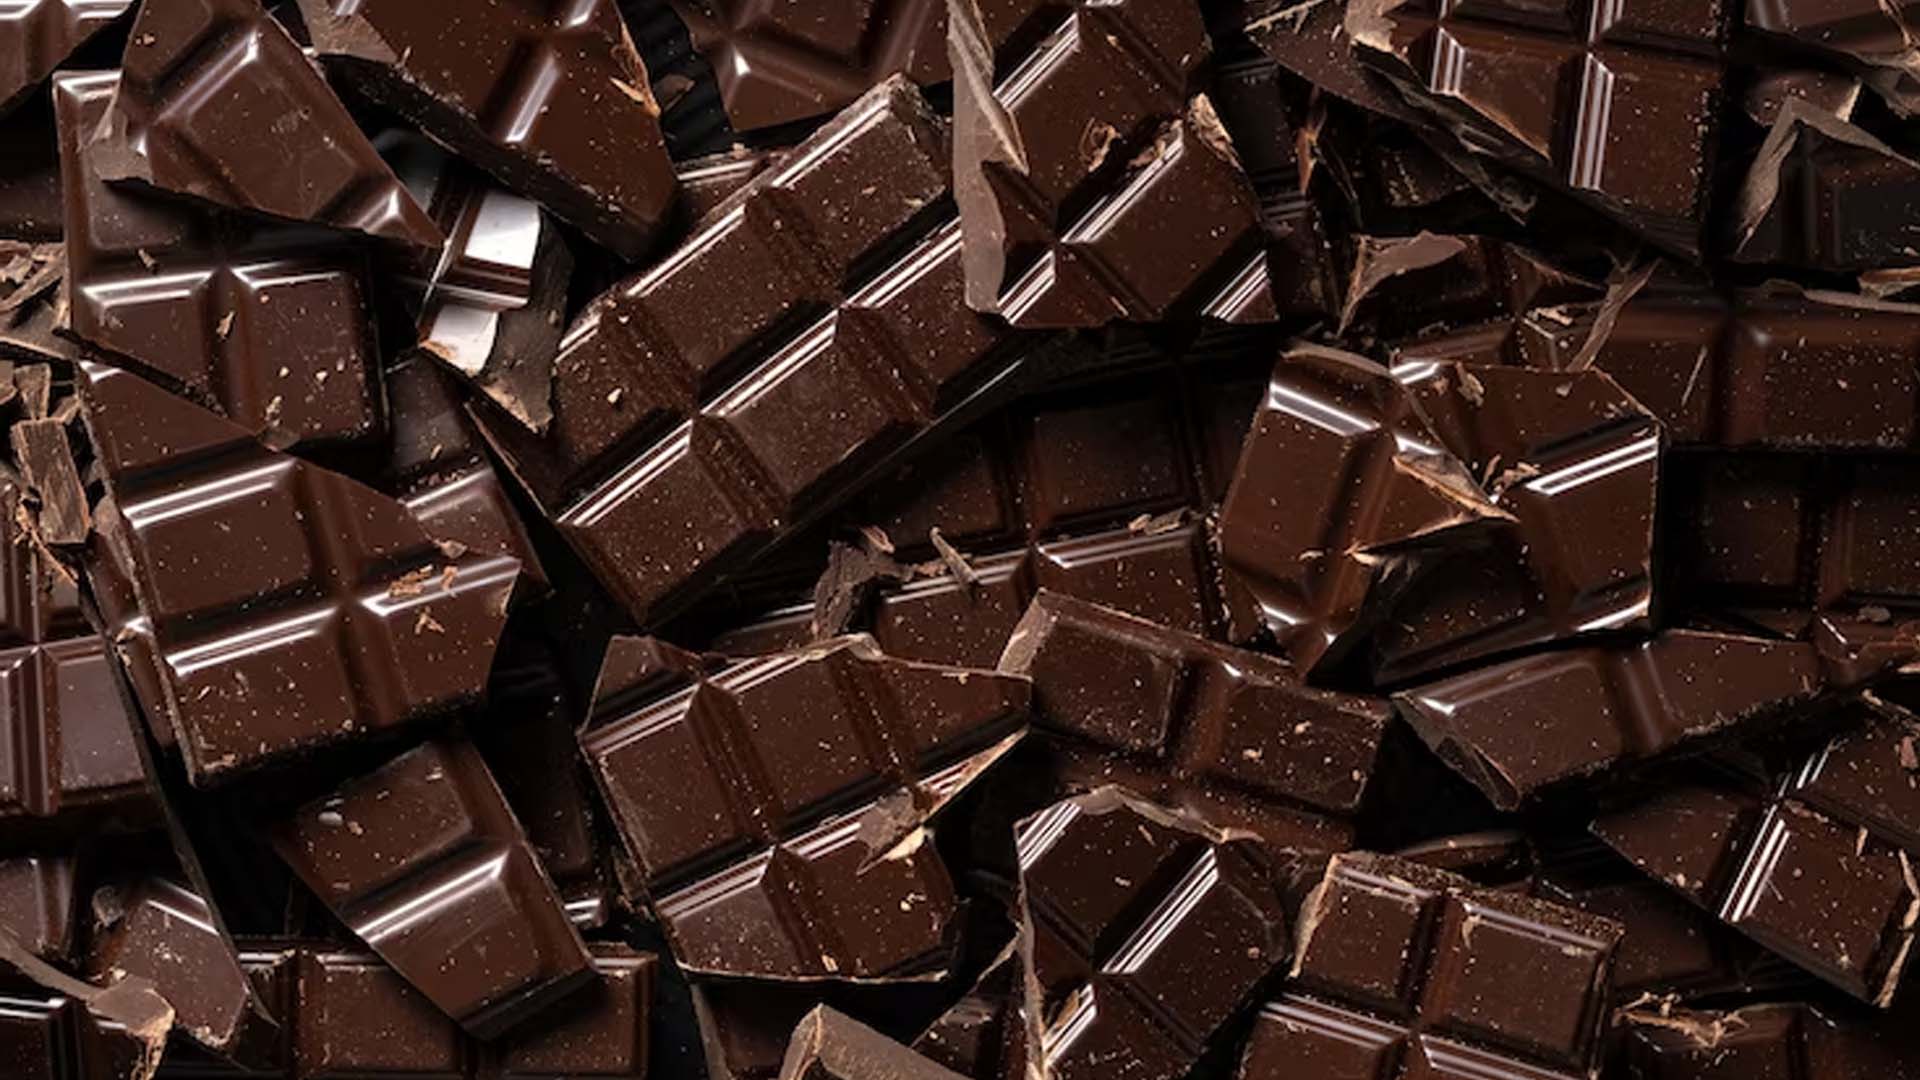 Nutrition facts of Dark Chocolate